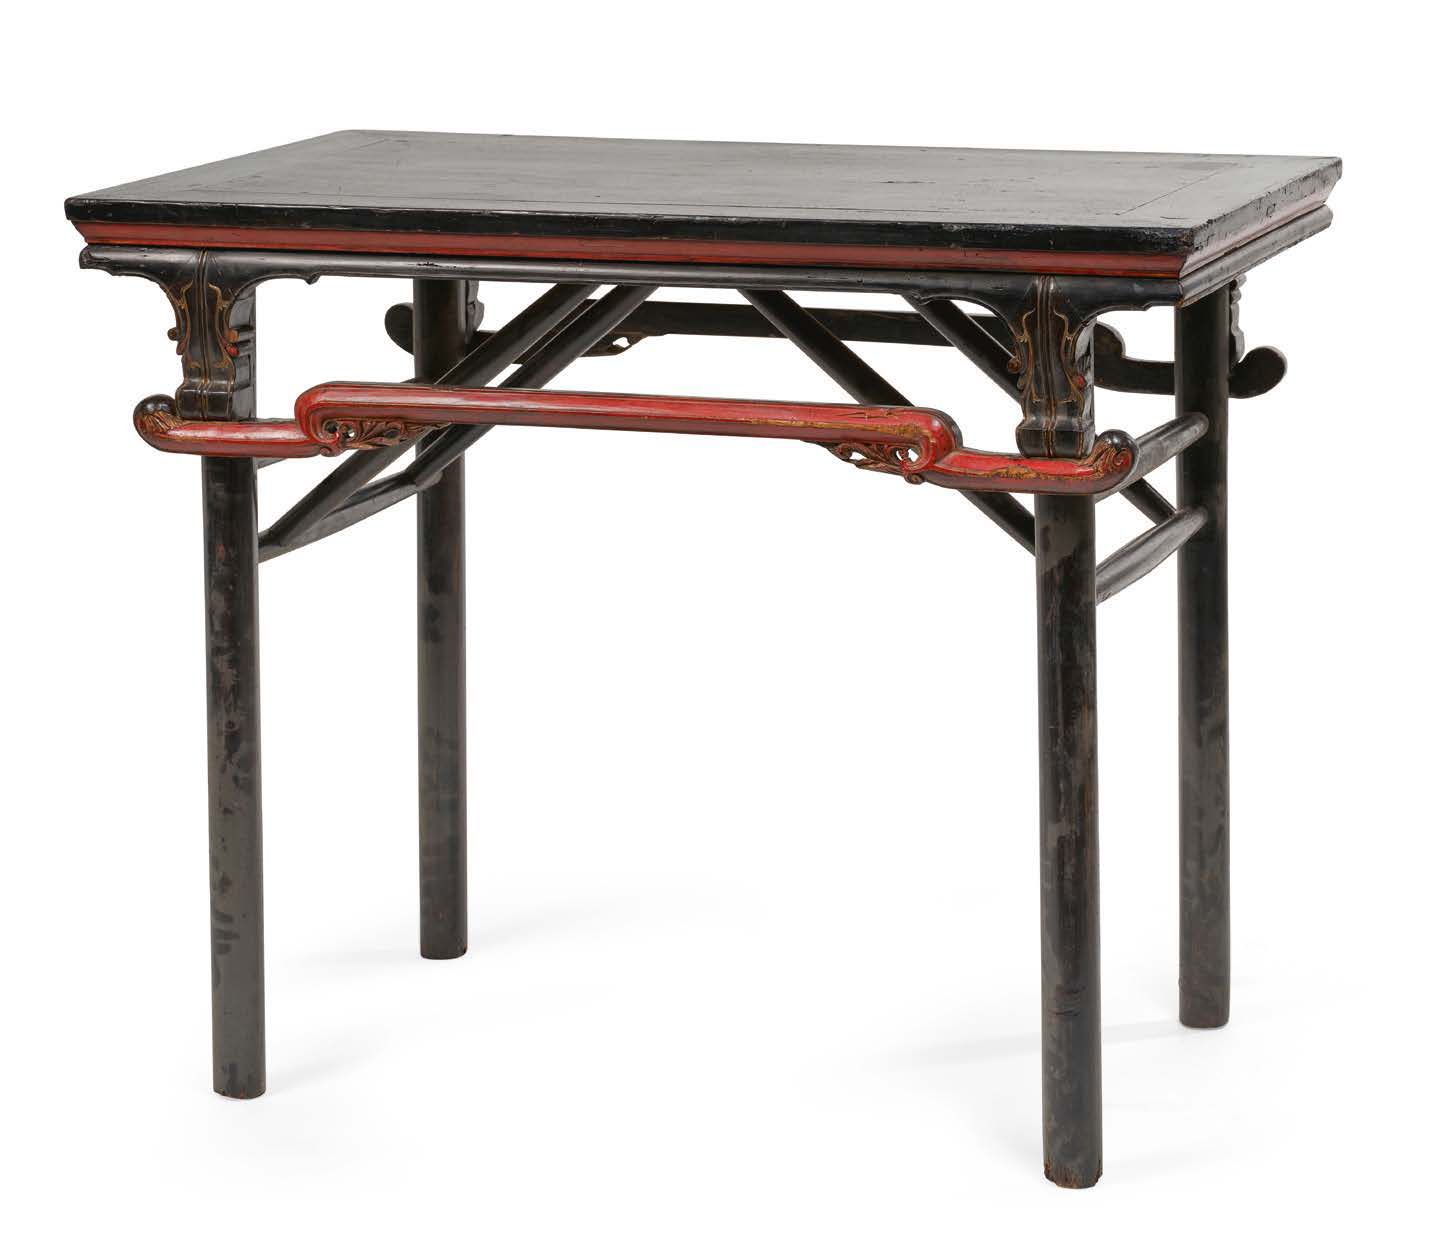 CHINE XIXe - XXe SIÈCLE Ingenious folding table in black and red lacquered wood,&hellip;